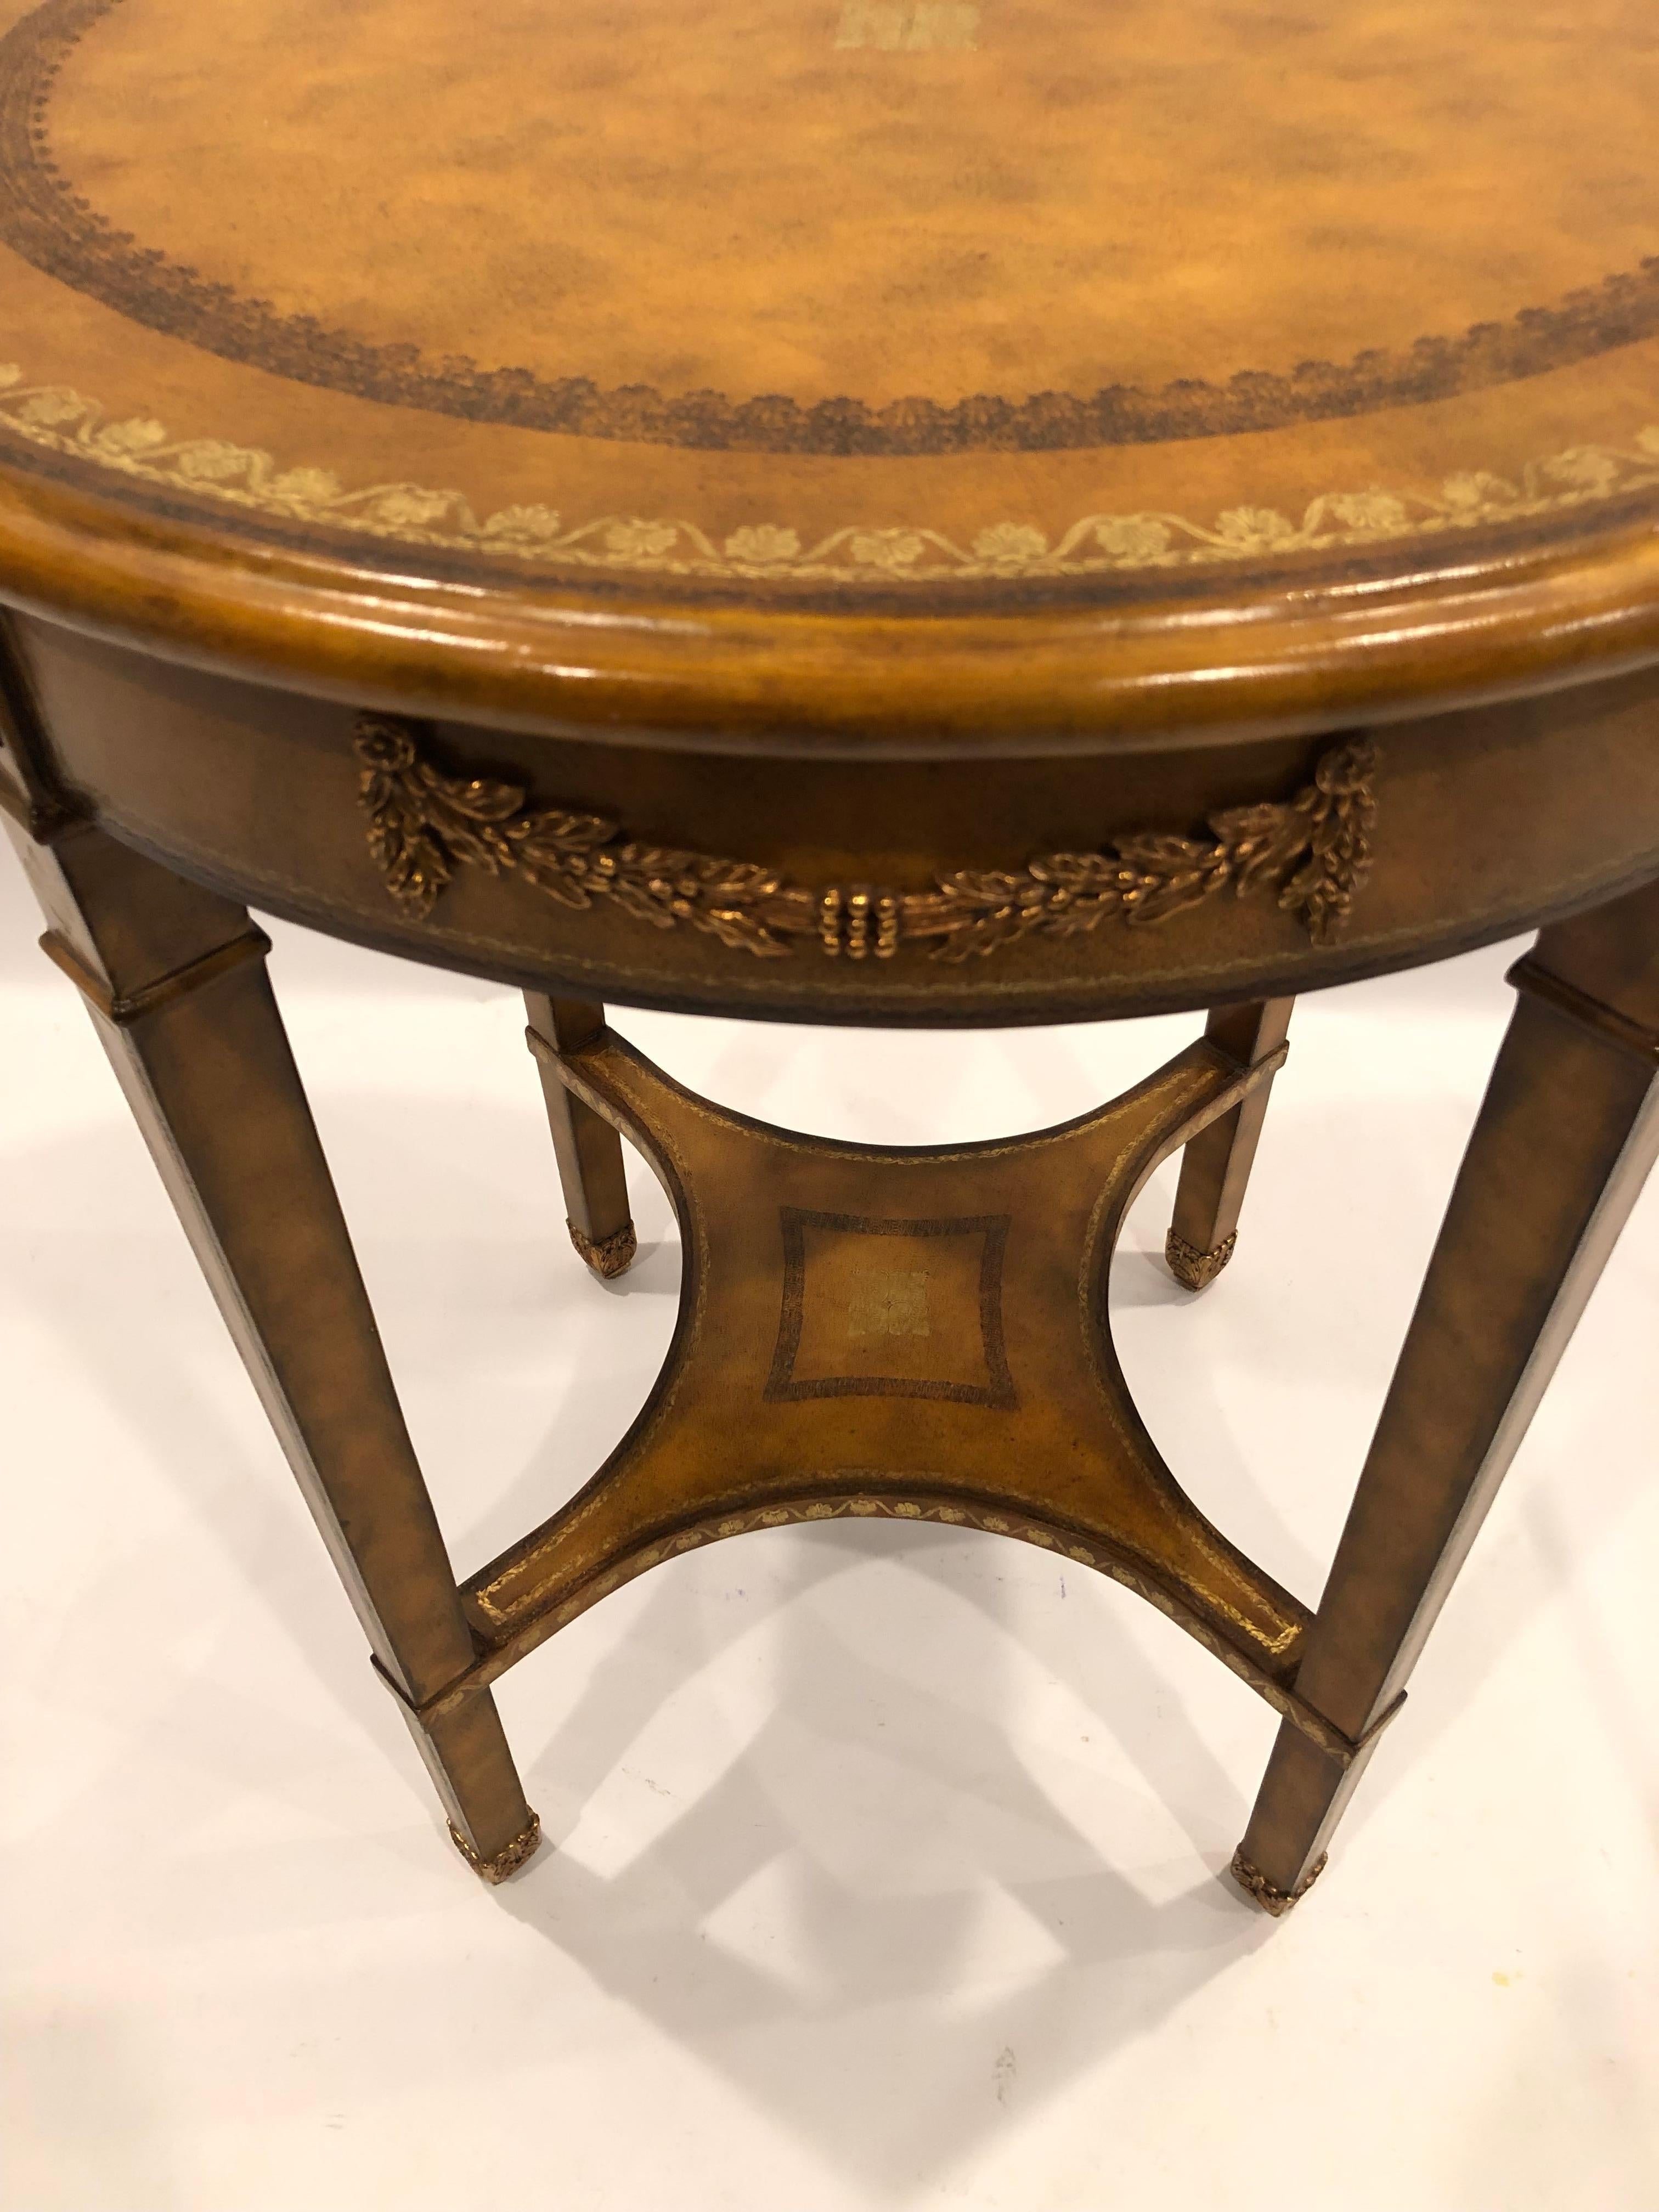 Handsome Round Leather Embossed Side Table by Maitland Smith In Good Condition For Sale In Hopewell, NJ